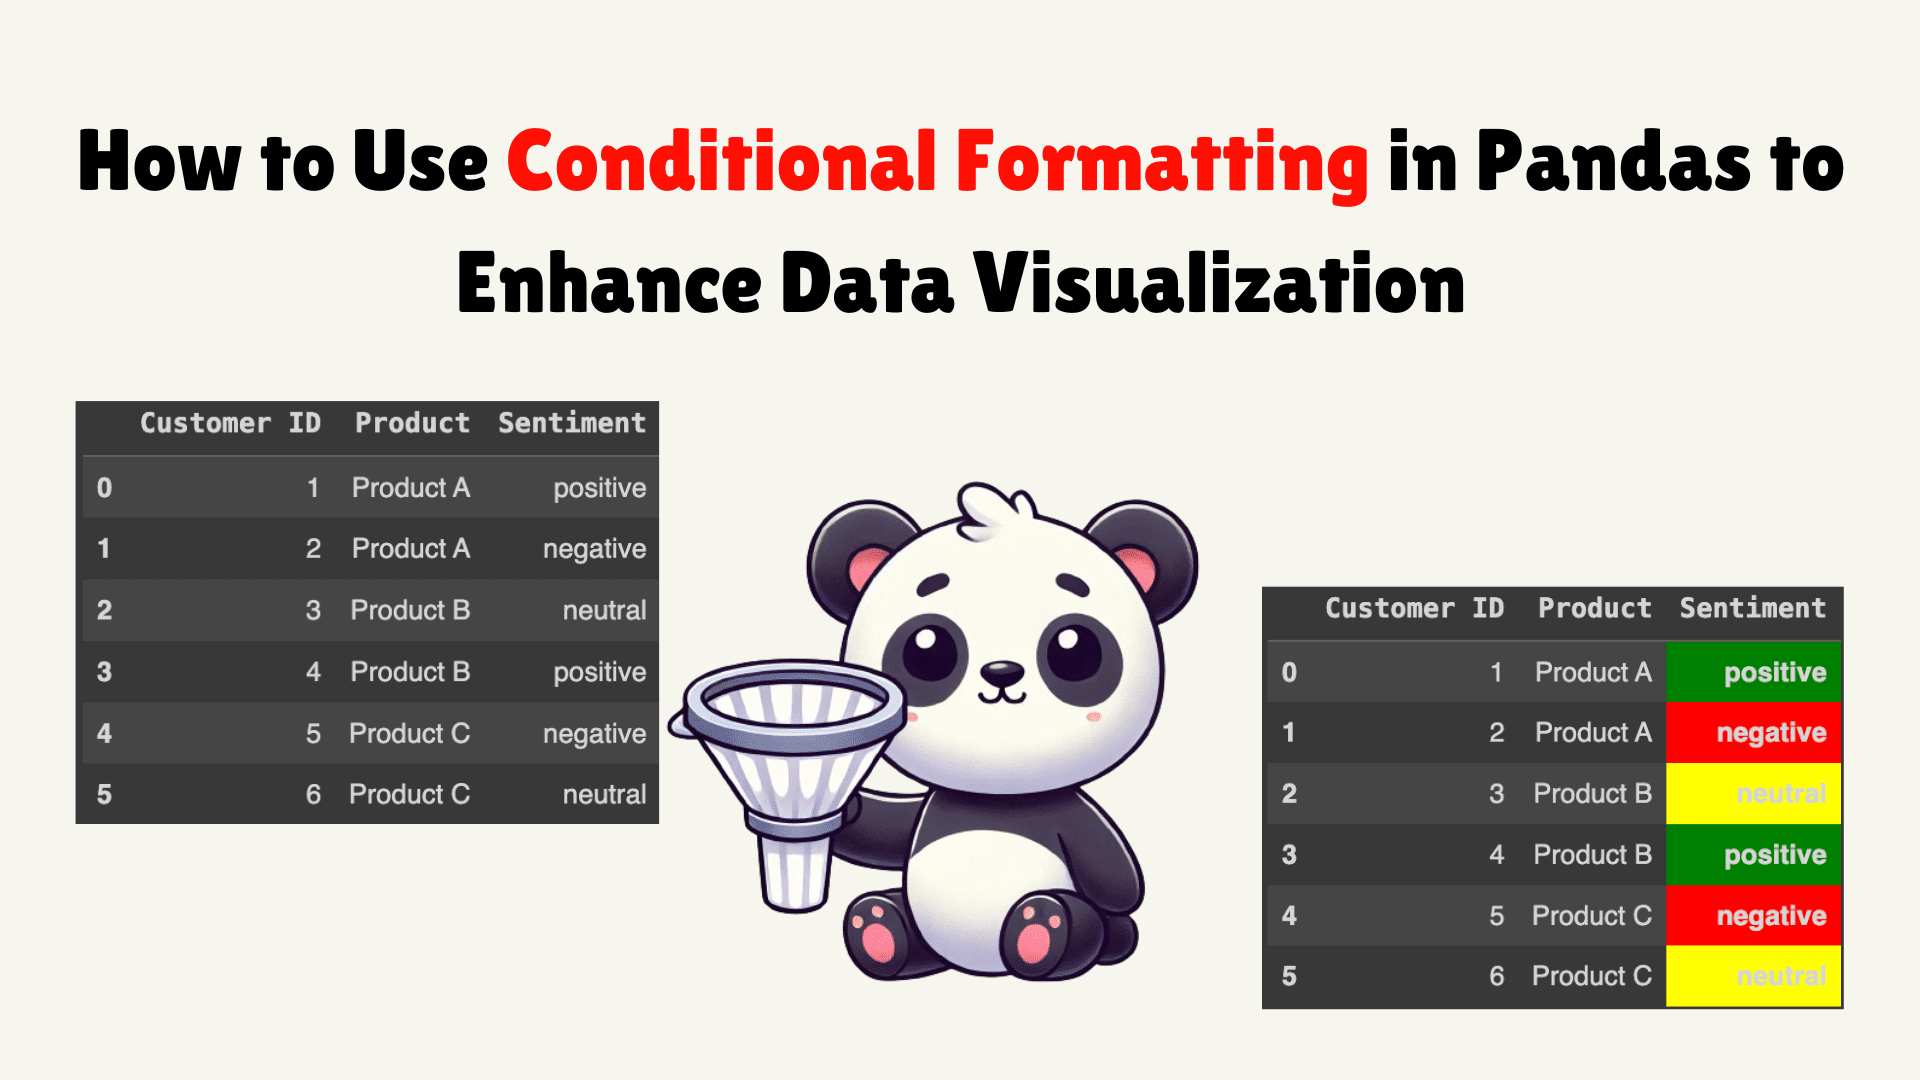 How to Use Conditional Formatting in Pandas to Enhance Data Visualization